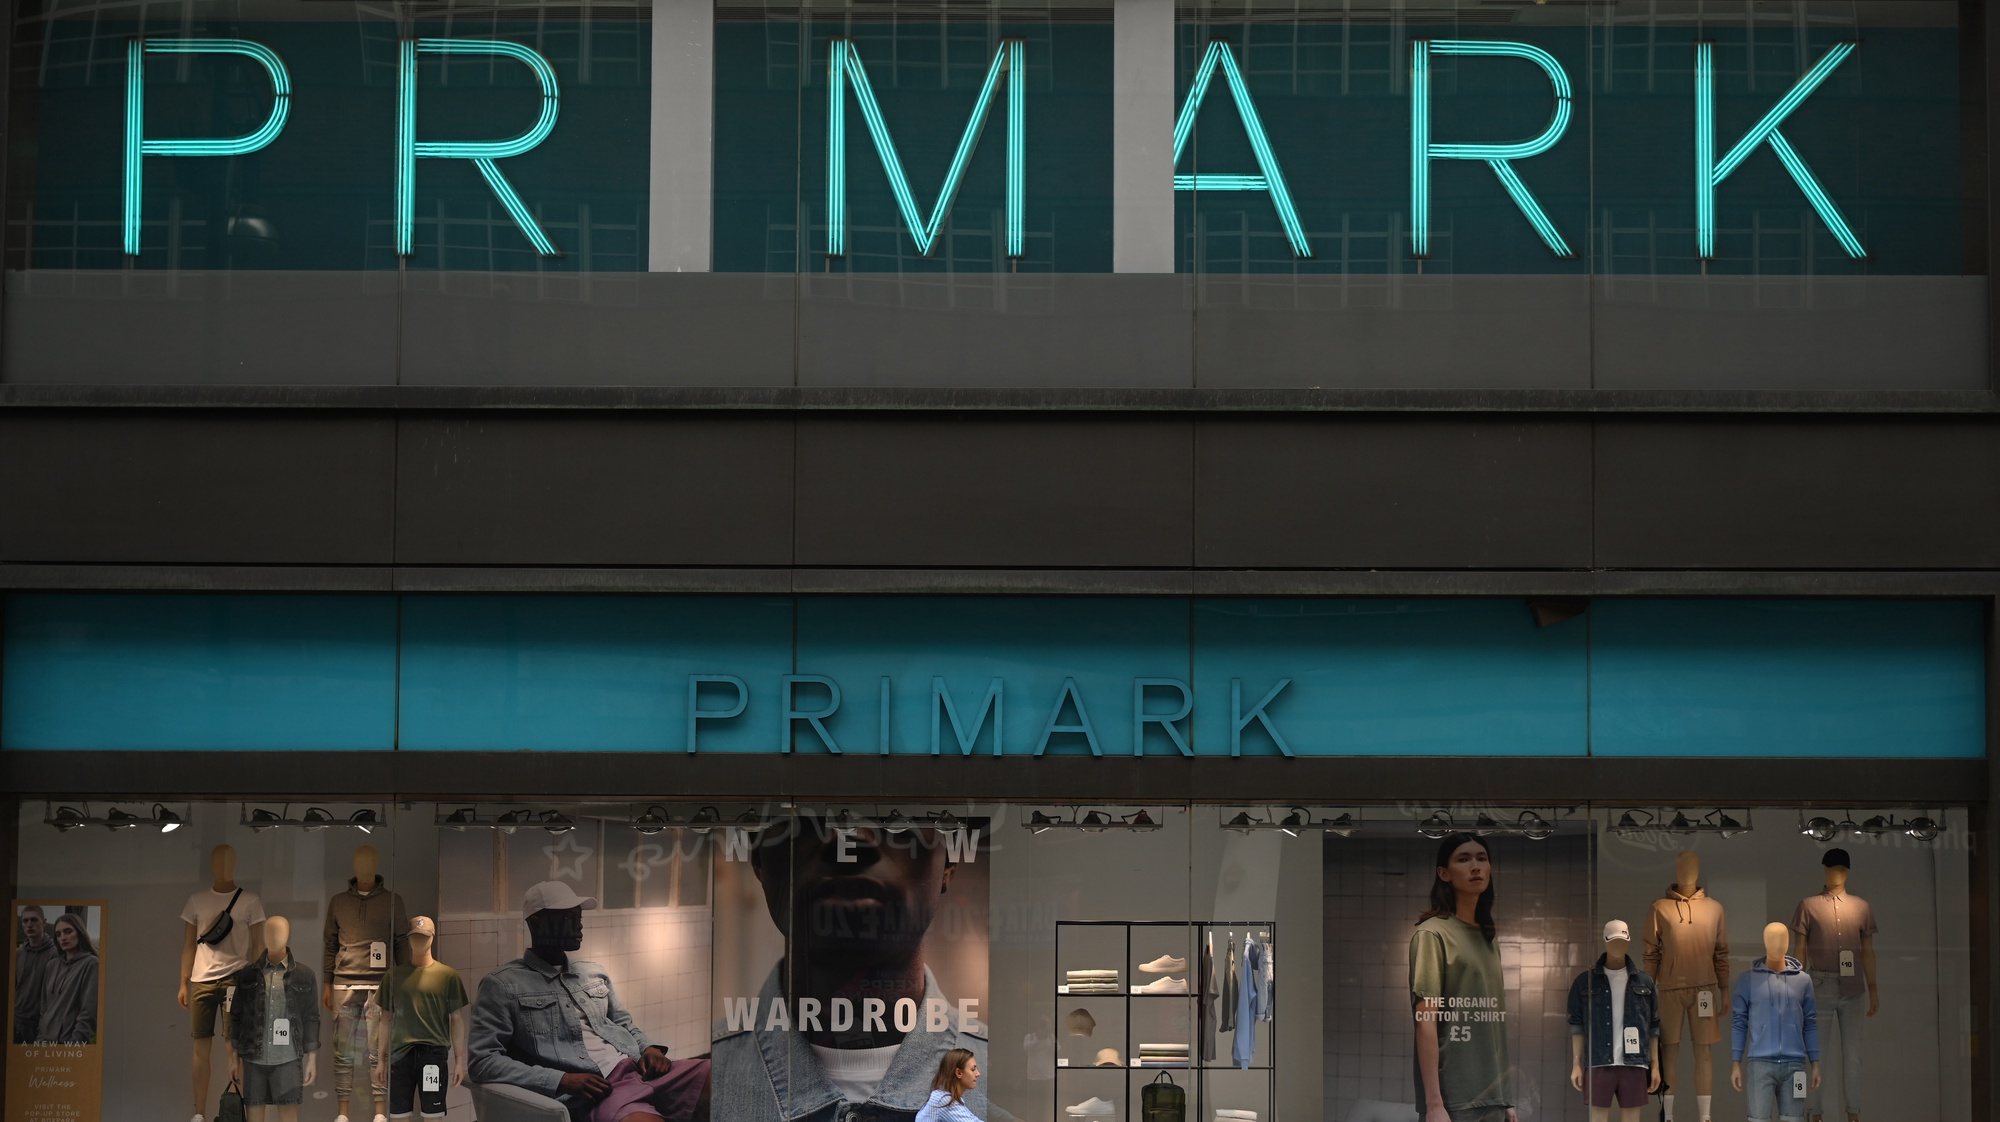 epa08447286 A woman cycles pass a shut Primark store on Oxford Street in London, Britain, 27 May 2020. Non-essential shops have been given the go-ahead to open their doors again in England from 15 June.  EPA/NEIL HALL